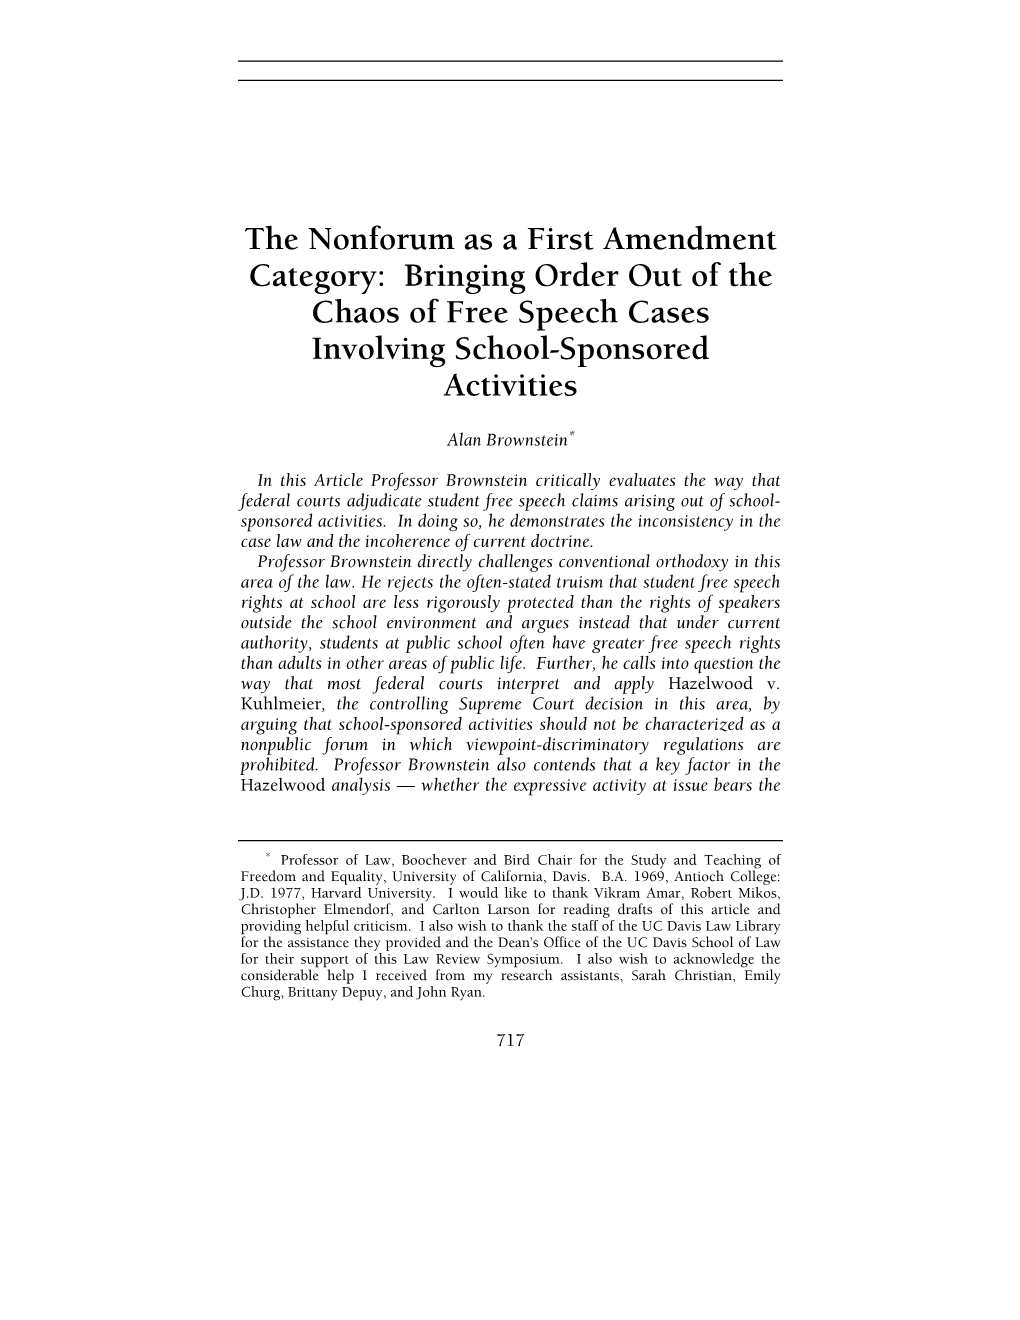 The Nonforum As a First Amendment Category: Bringing Order out of the Chaos of Free Speech Cases Involving School-Sponsored Activities